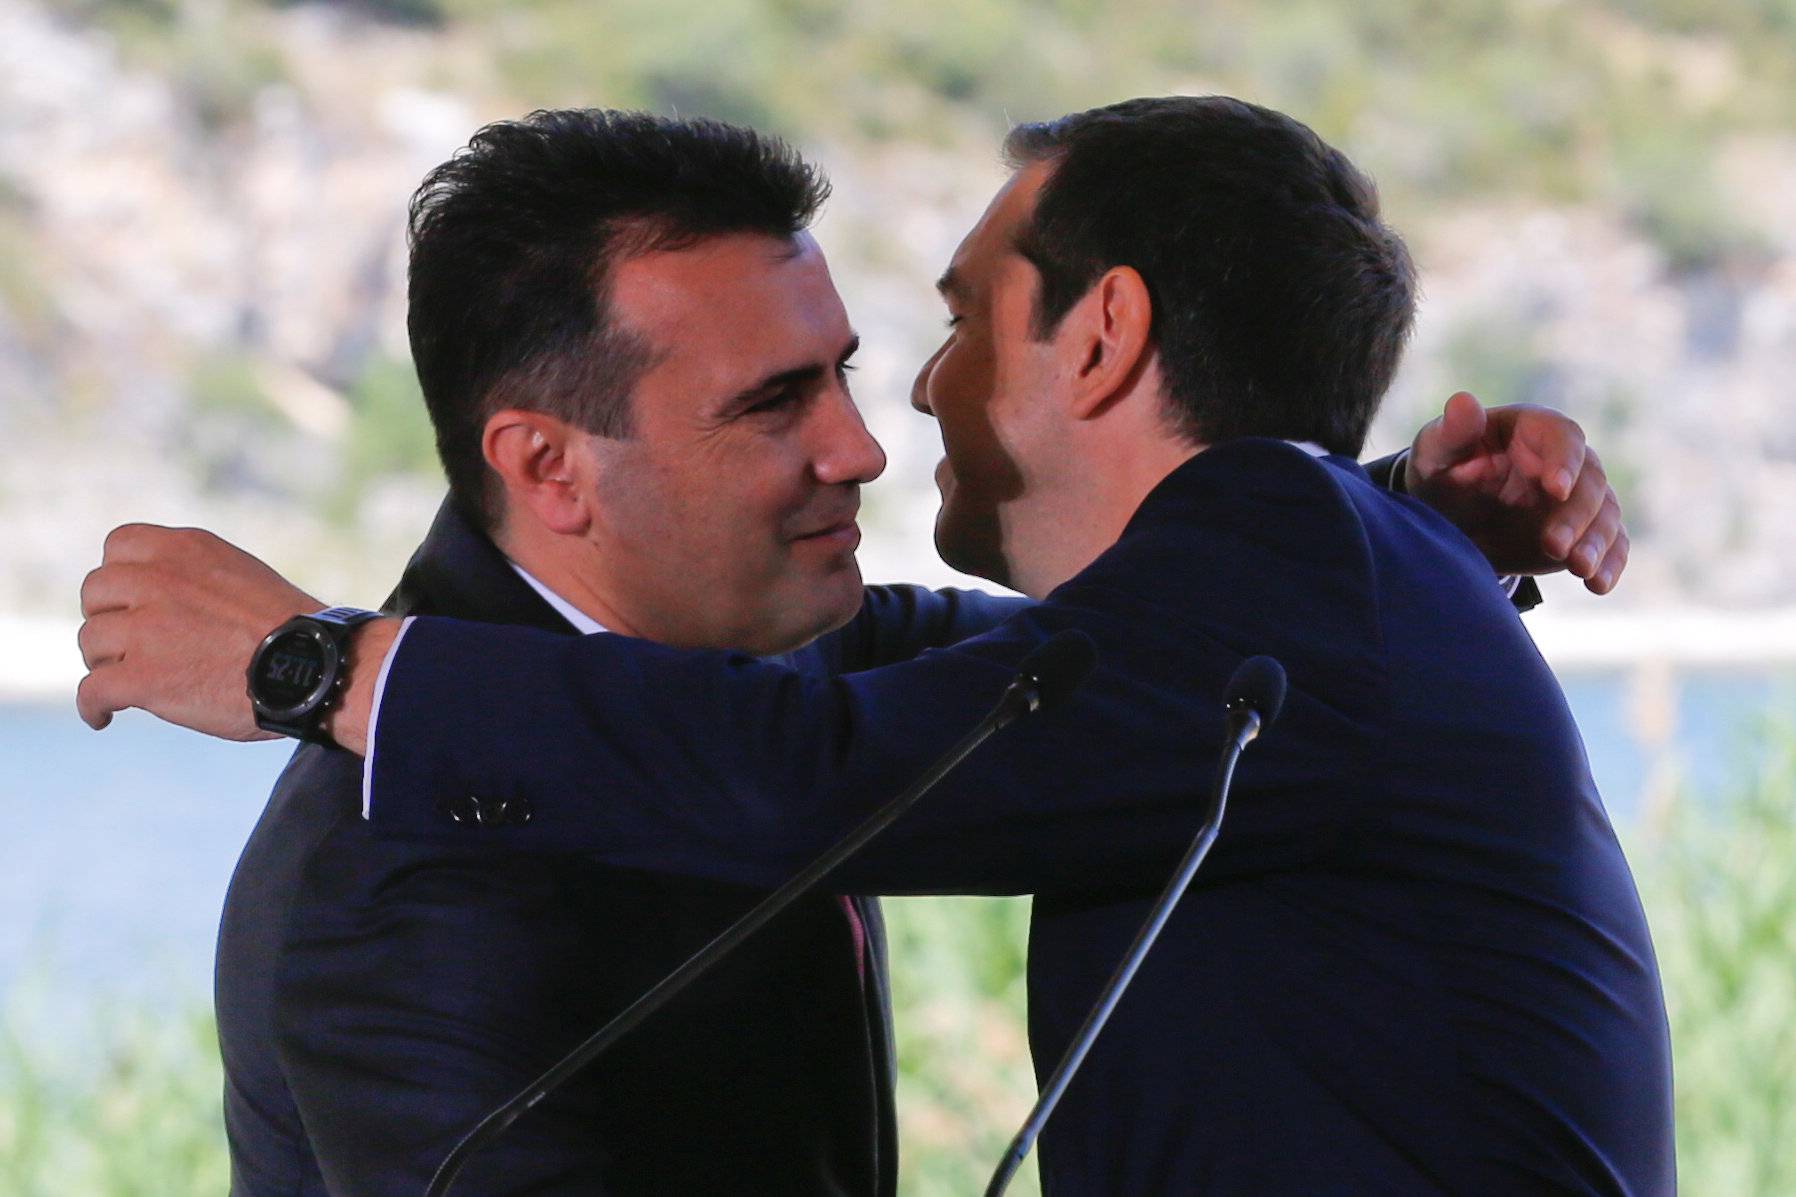 Greek Prime Minister Alexis Tsipras and Macedonian Prime Minister Zoran Zaev hug before the signing of an accord to settle a long dispute over the former Yugoslav republic's name in the village of Psarades